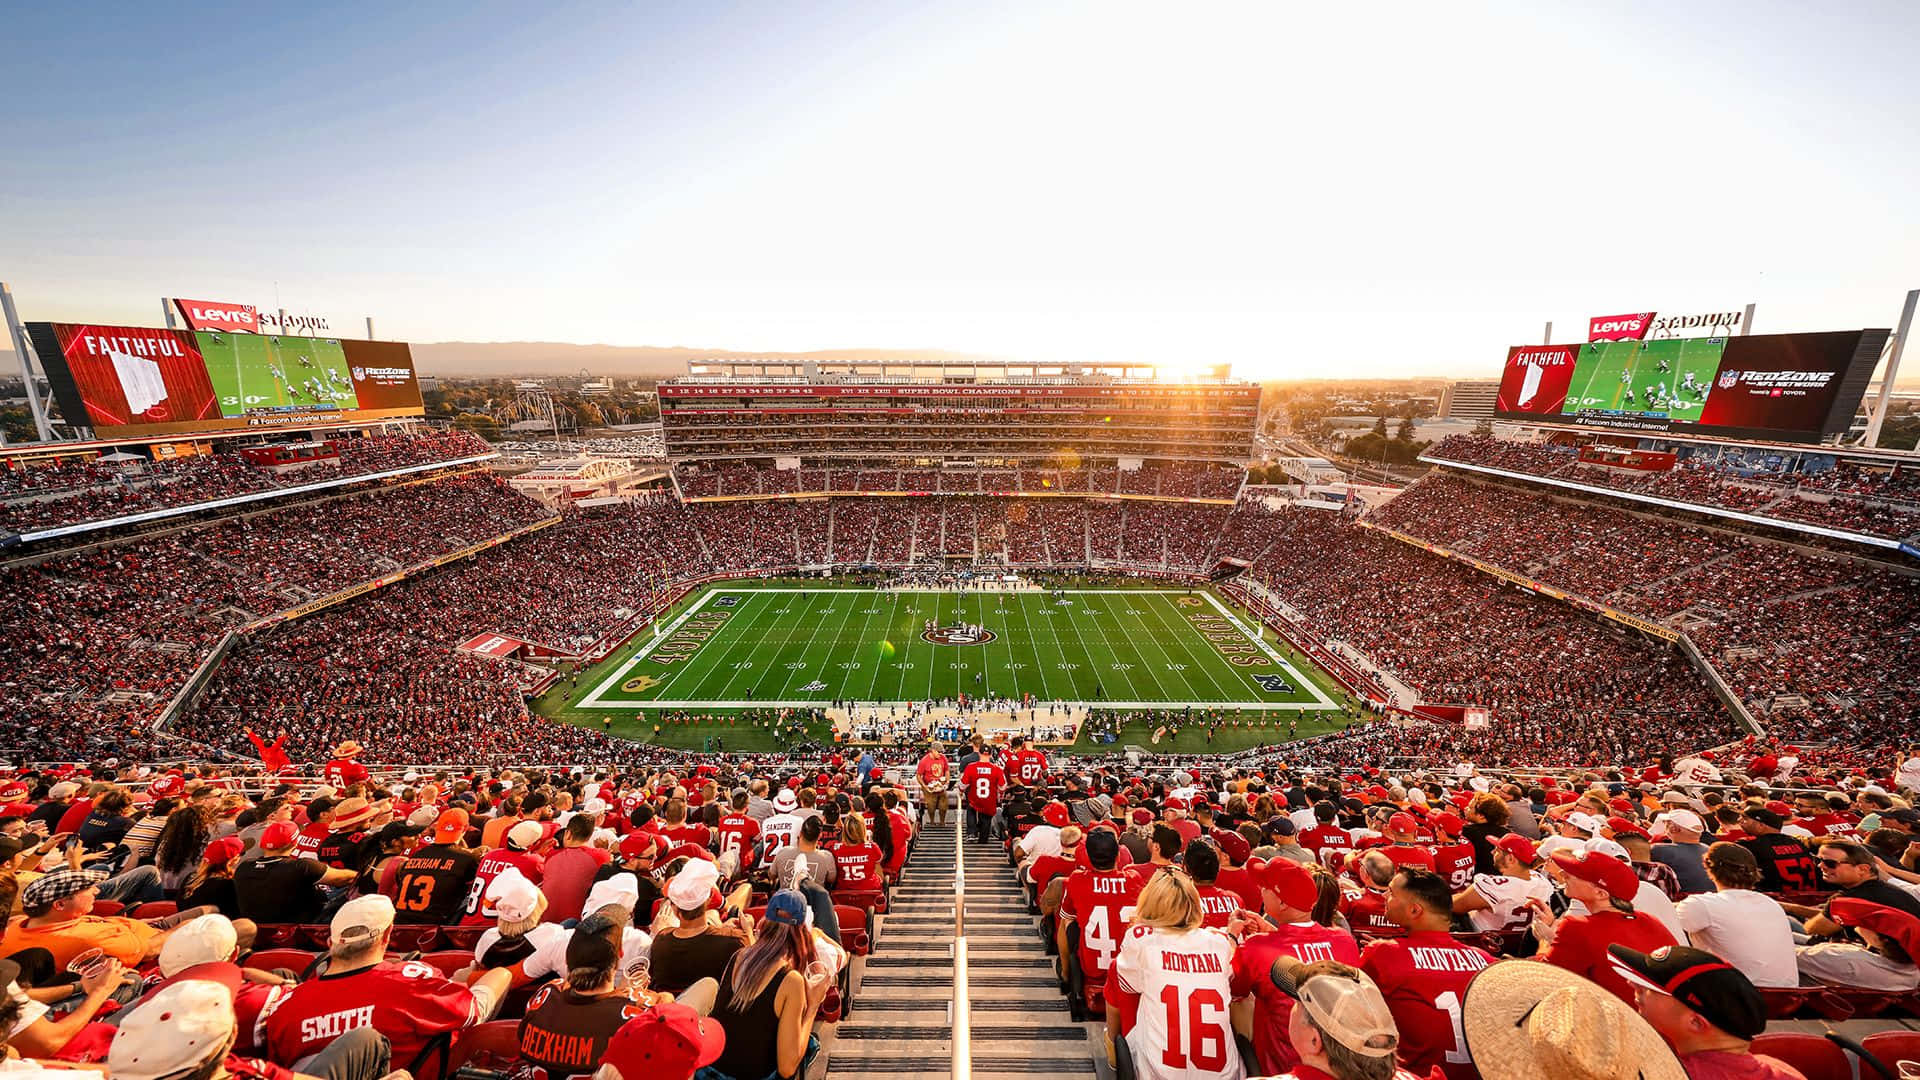 Show Your True Colors and Cheer On Your Beloved San Francisco 49ers.